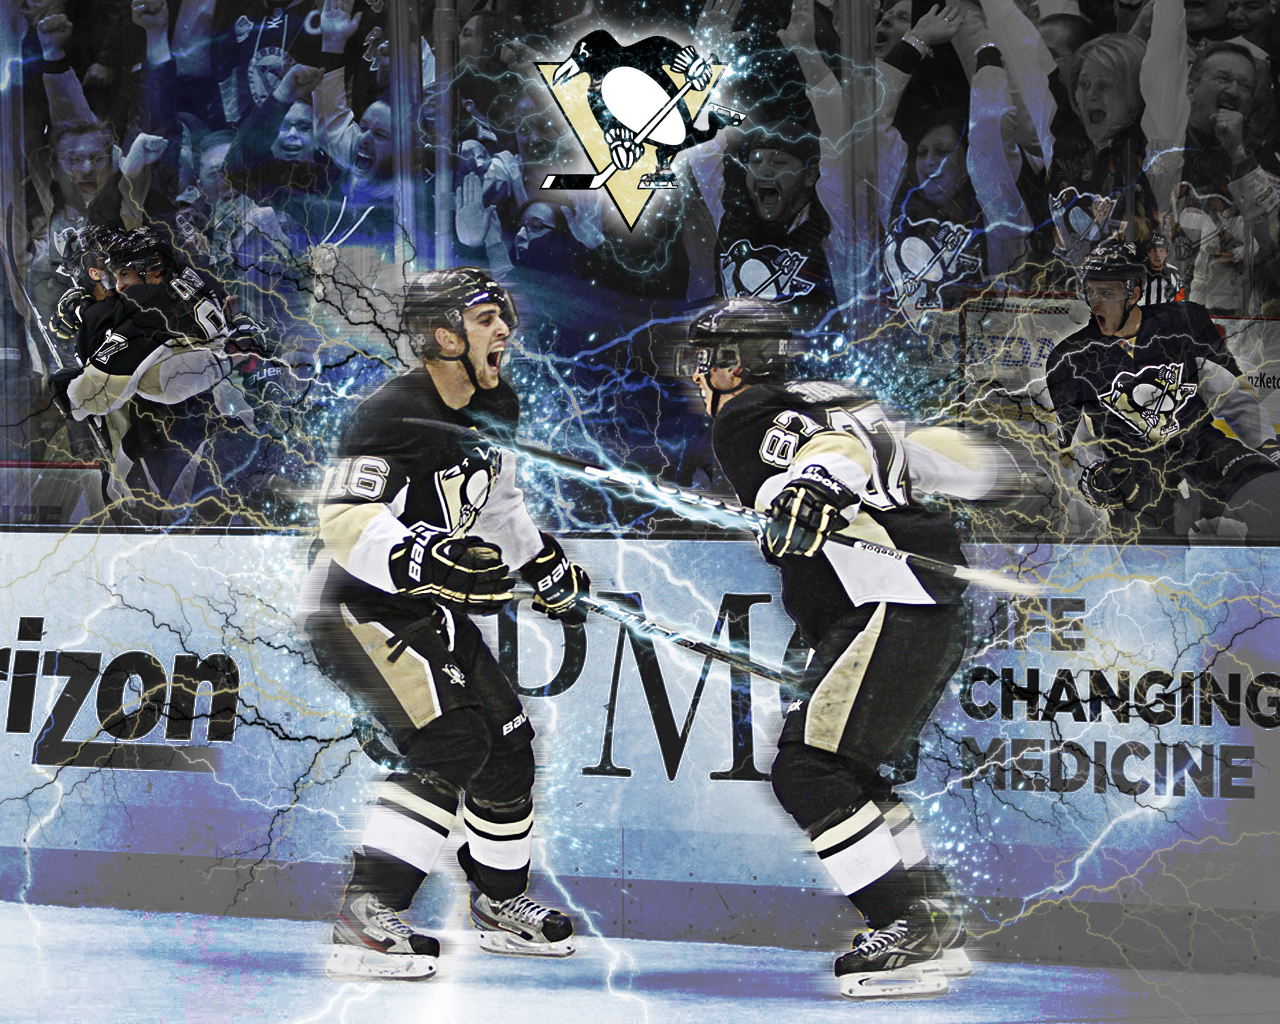 psf on wednesday march 13 2013 in pittsburgh penguins wallpapers 1280x1024